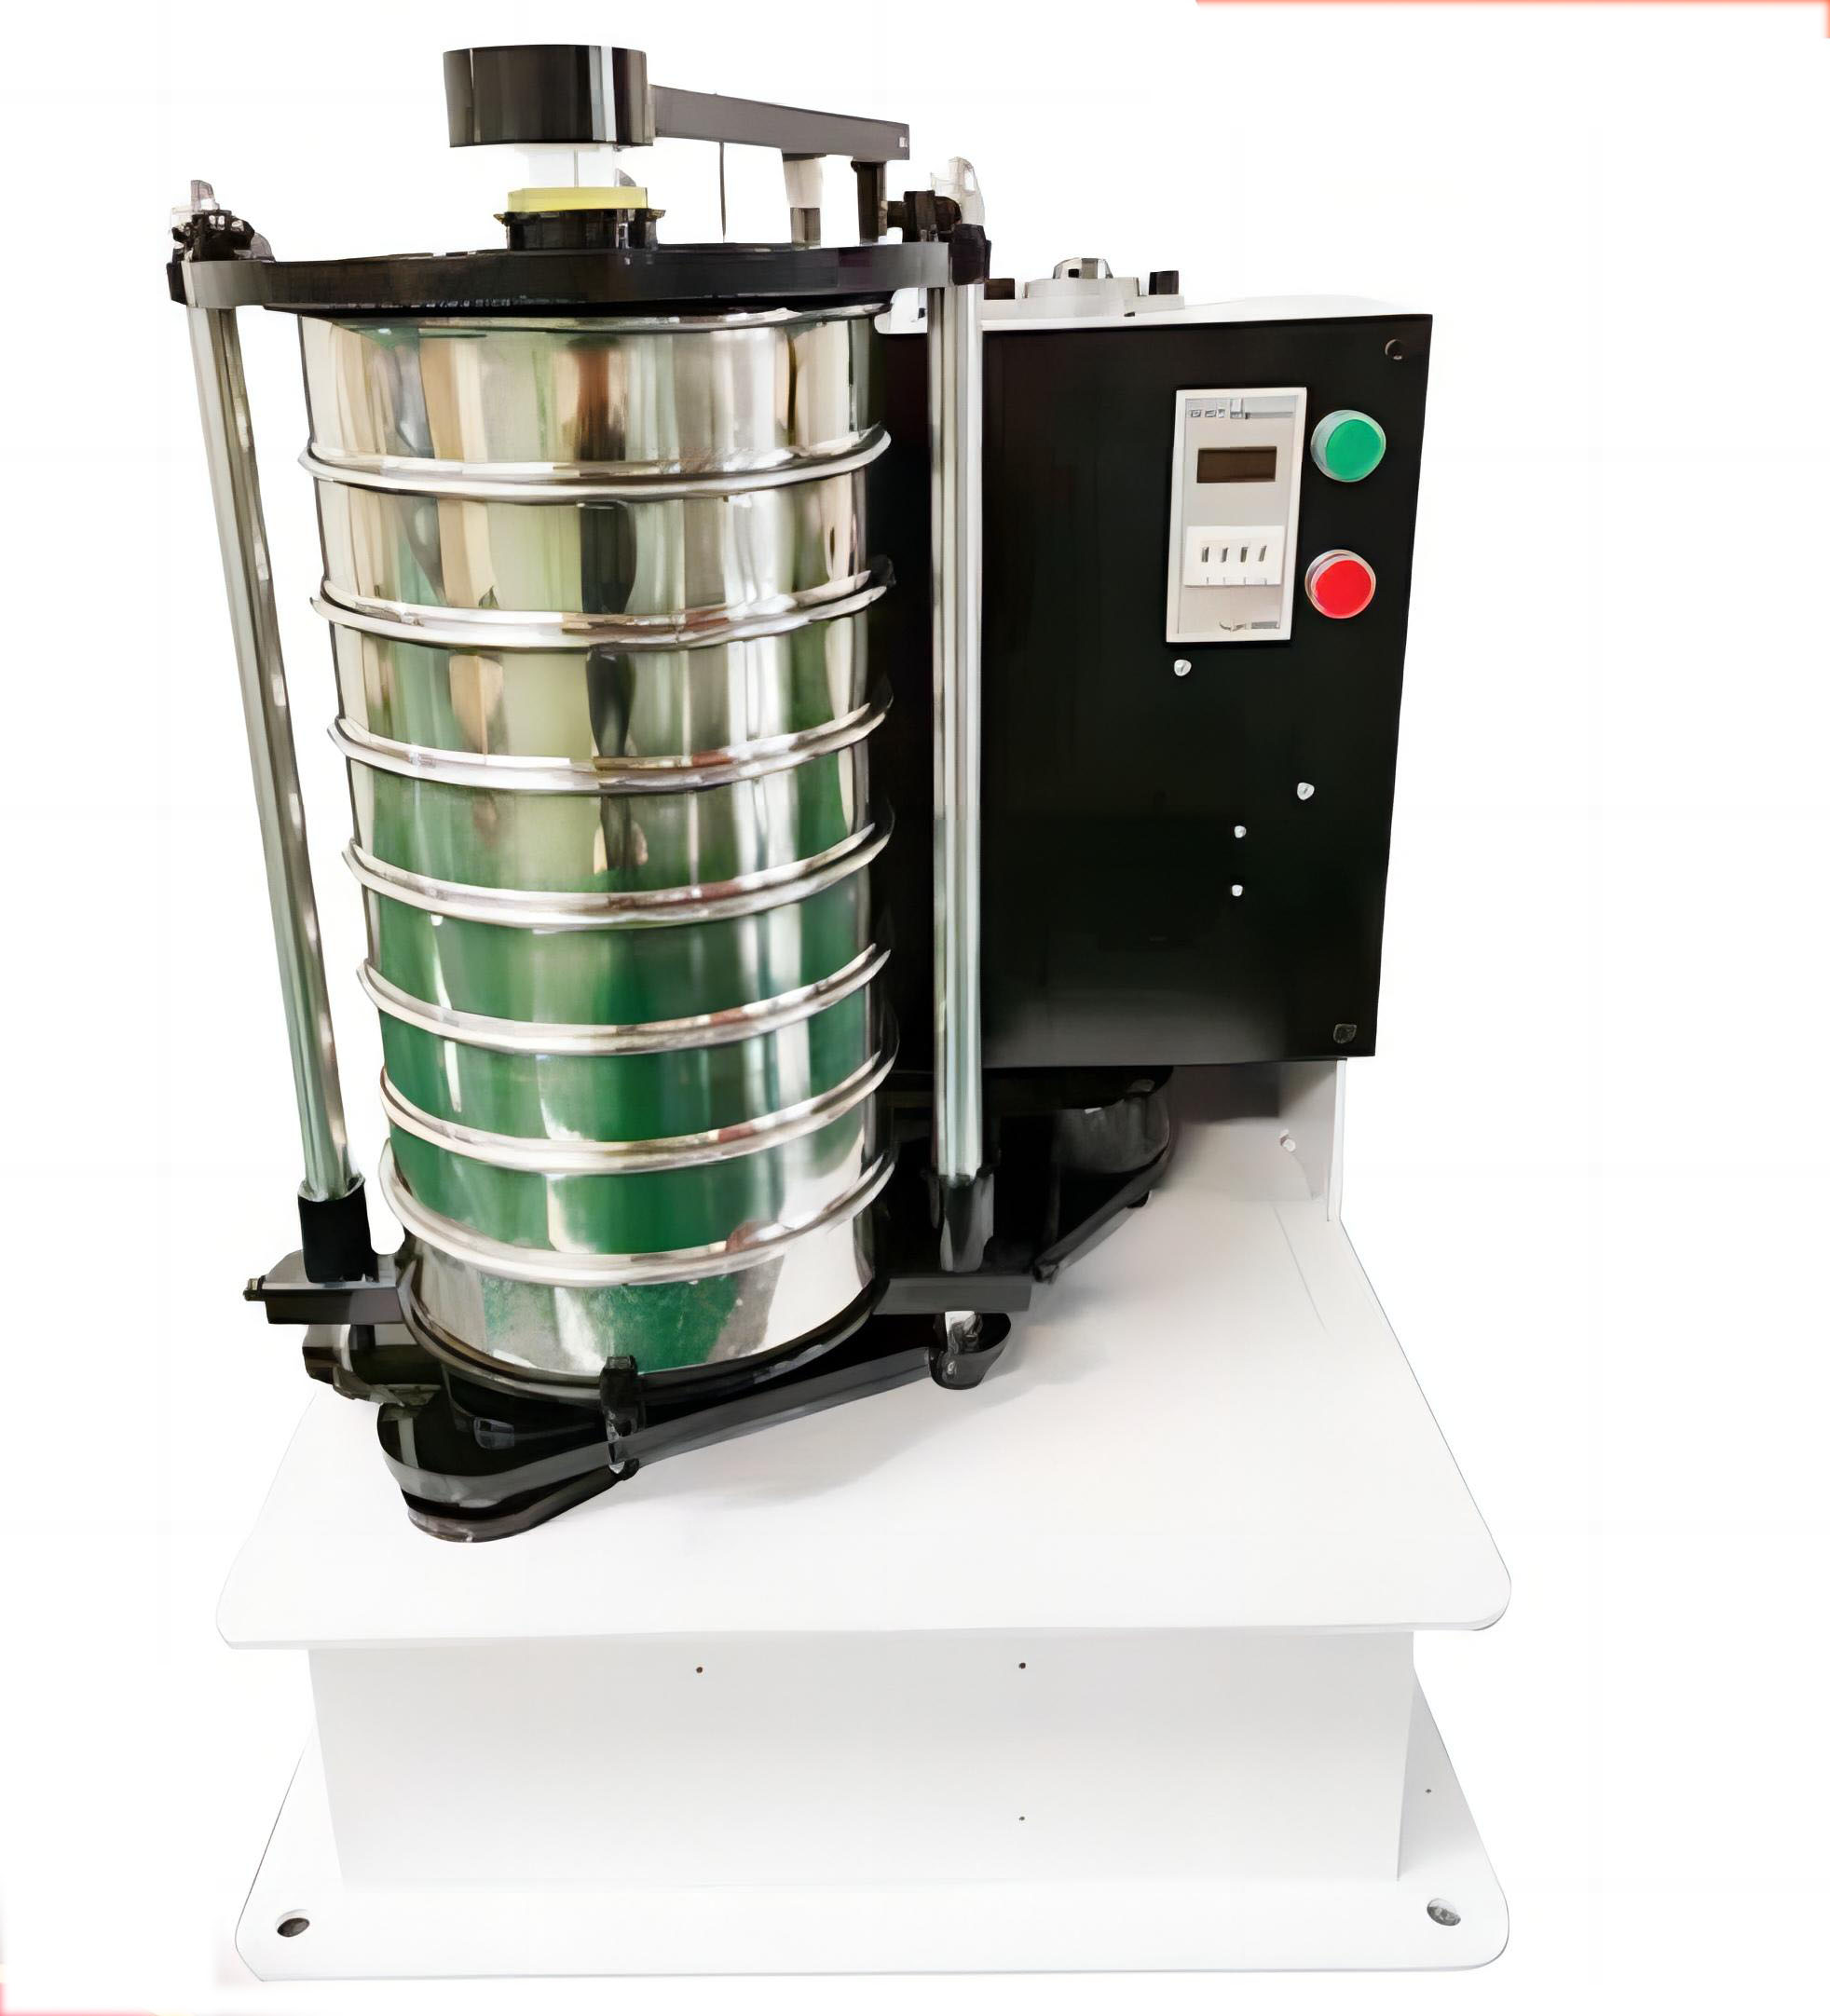 Electromagnetic Vibratory Sieve Shaker for Laboratory Sieving : Quote, RFQ, Price and Buy